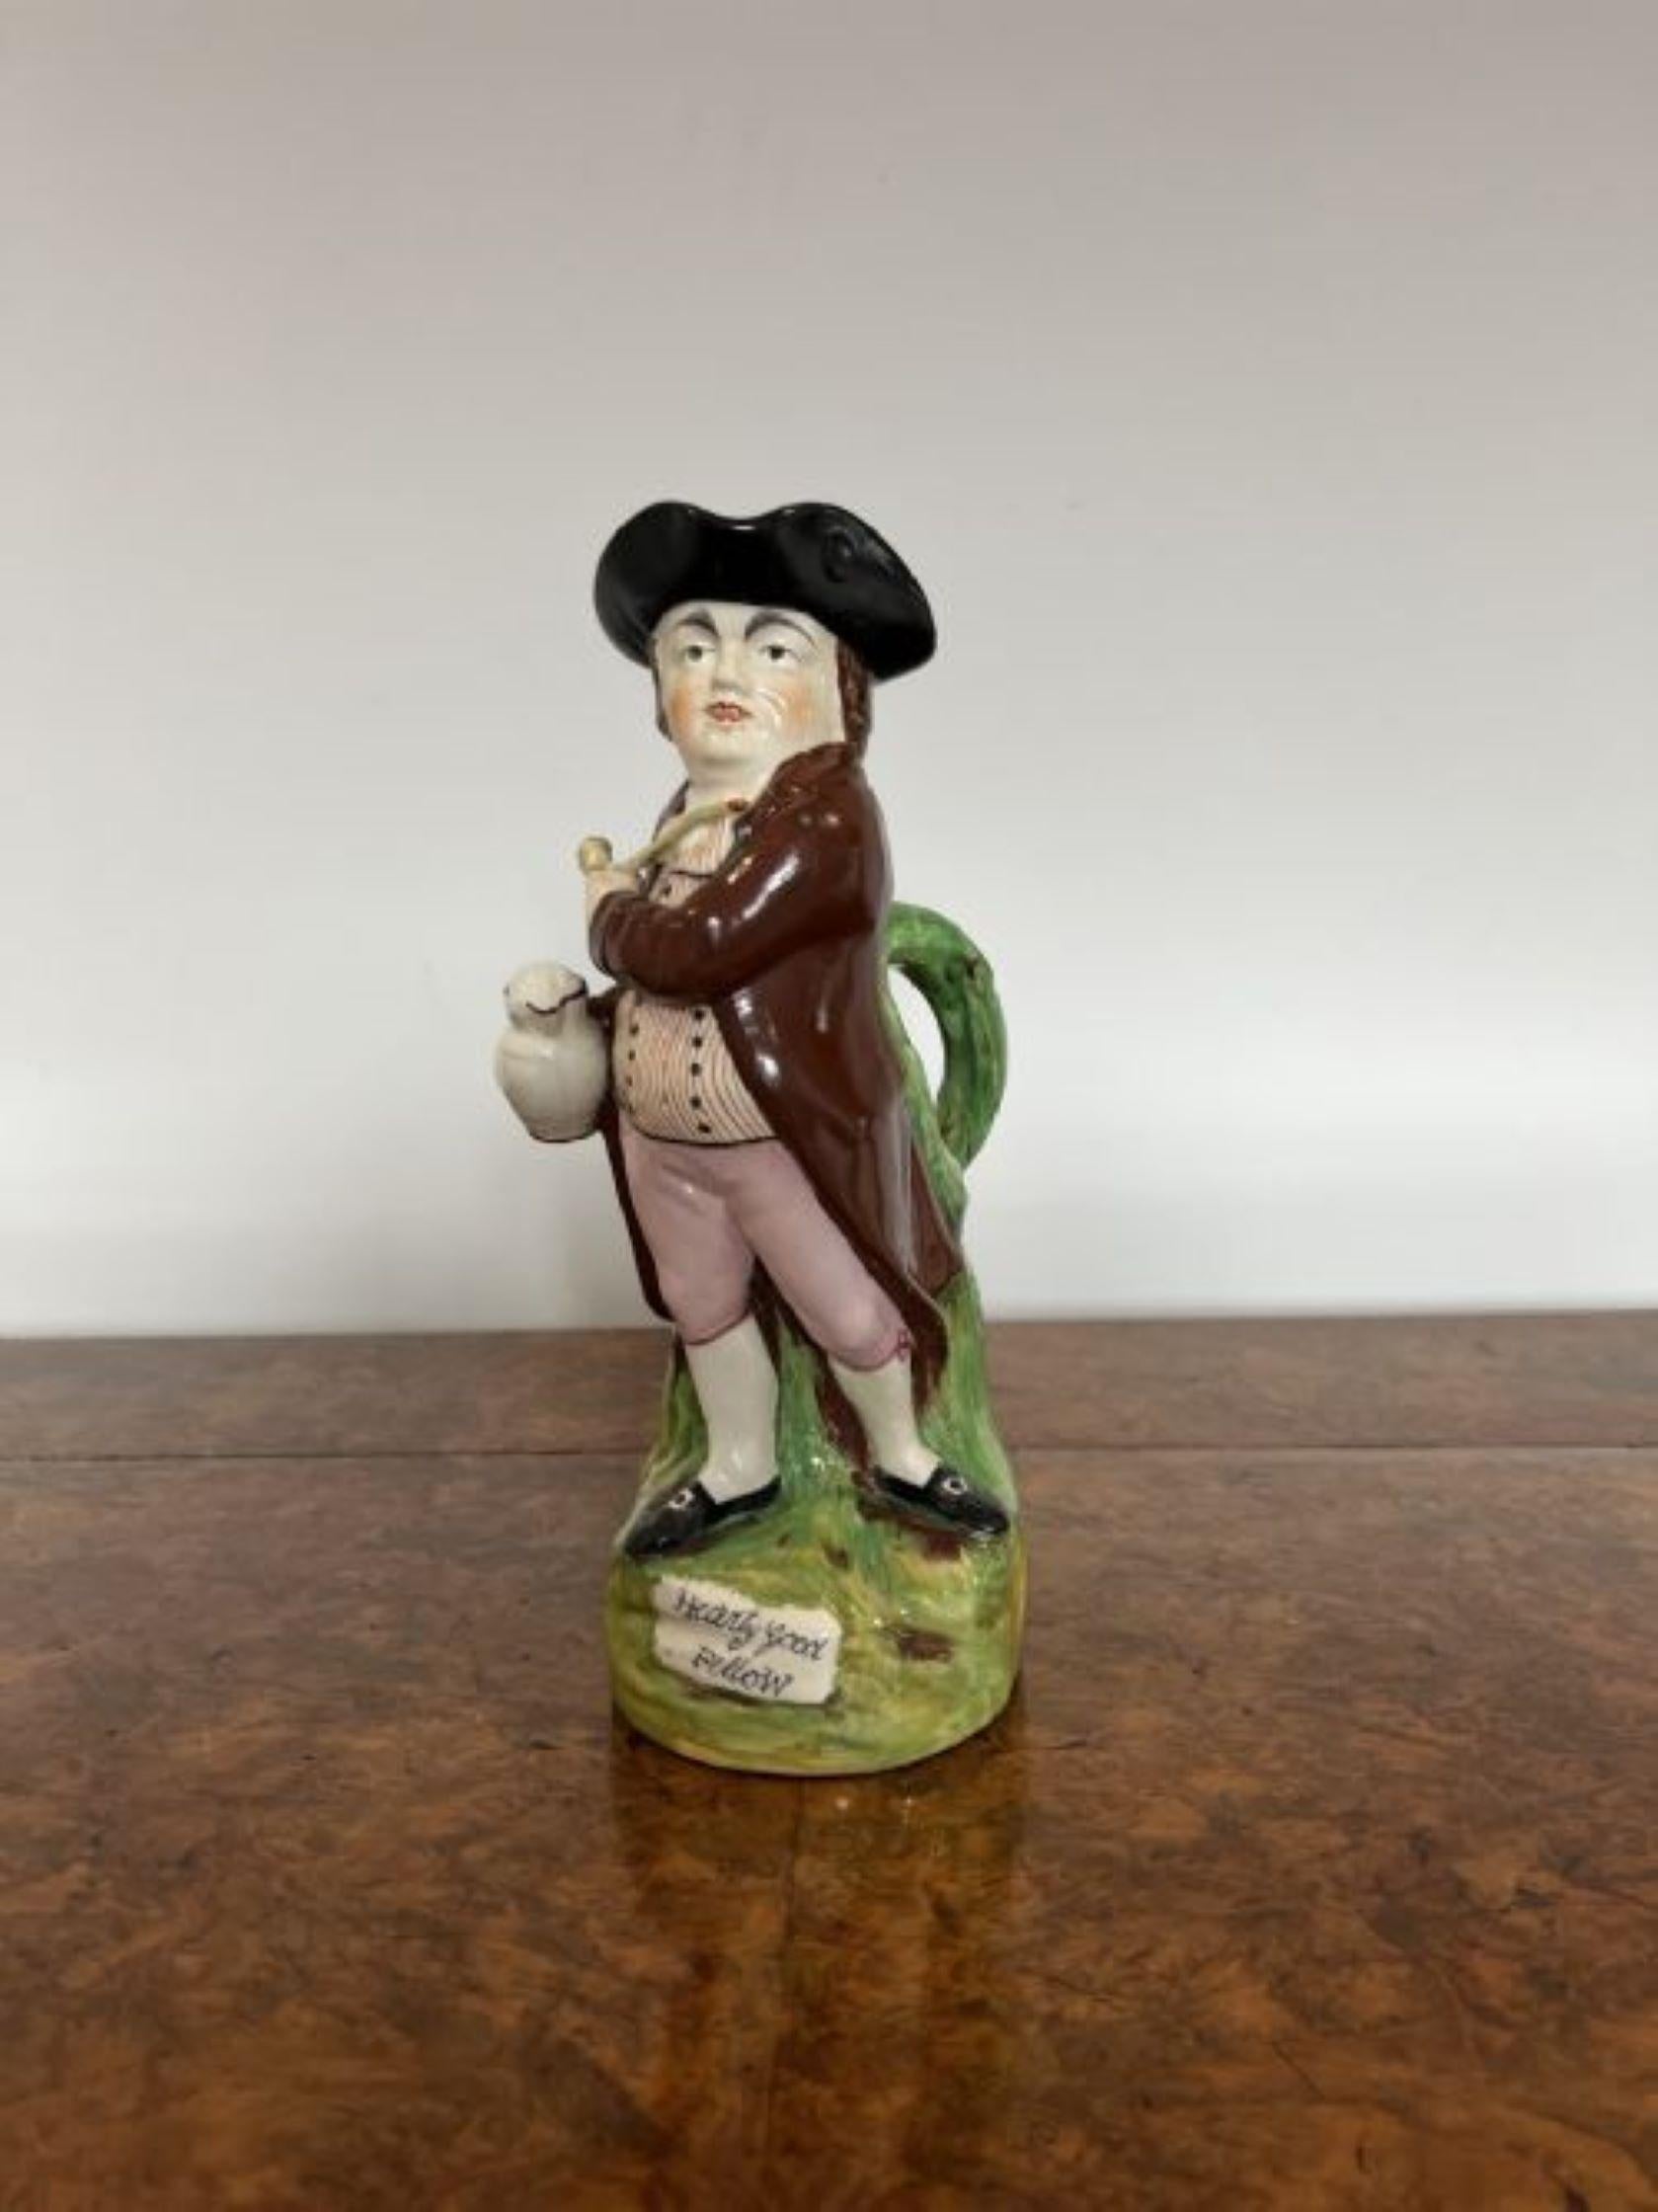 Antique Victorian Staffordshire Toby Jug having a quality Victorian Staffordshire toby jug of a man in wonderful period clothing in red, pink, green, white and black vibrant colours holding a jug of ale in one hand and a pipe in the other, with a